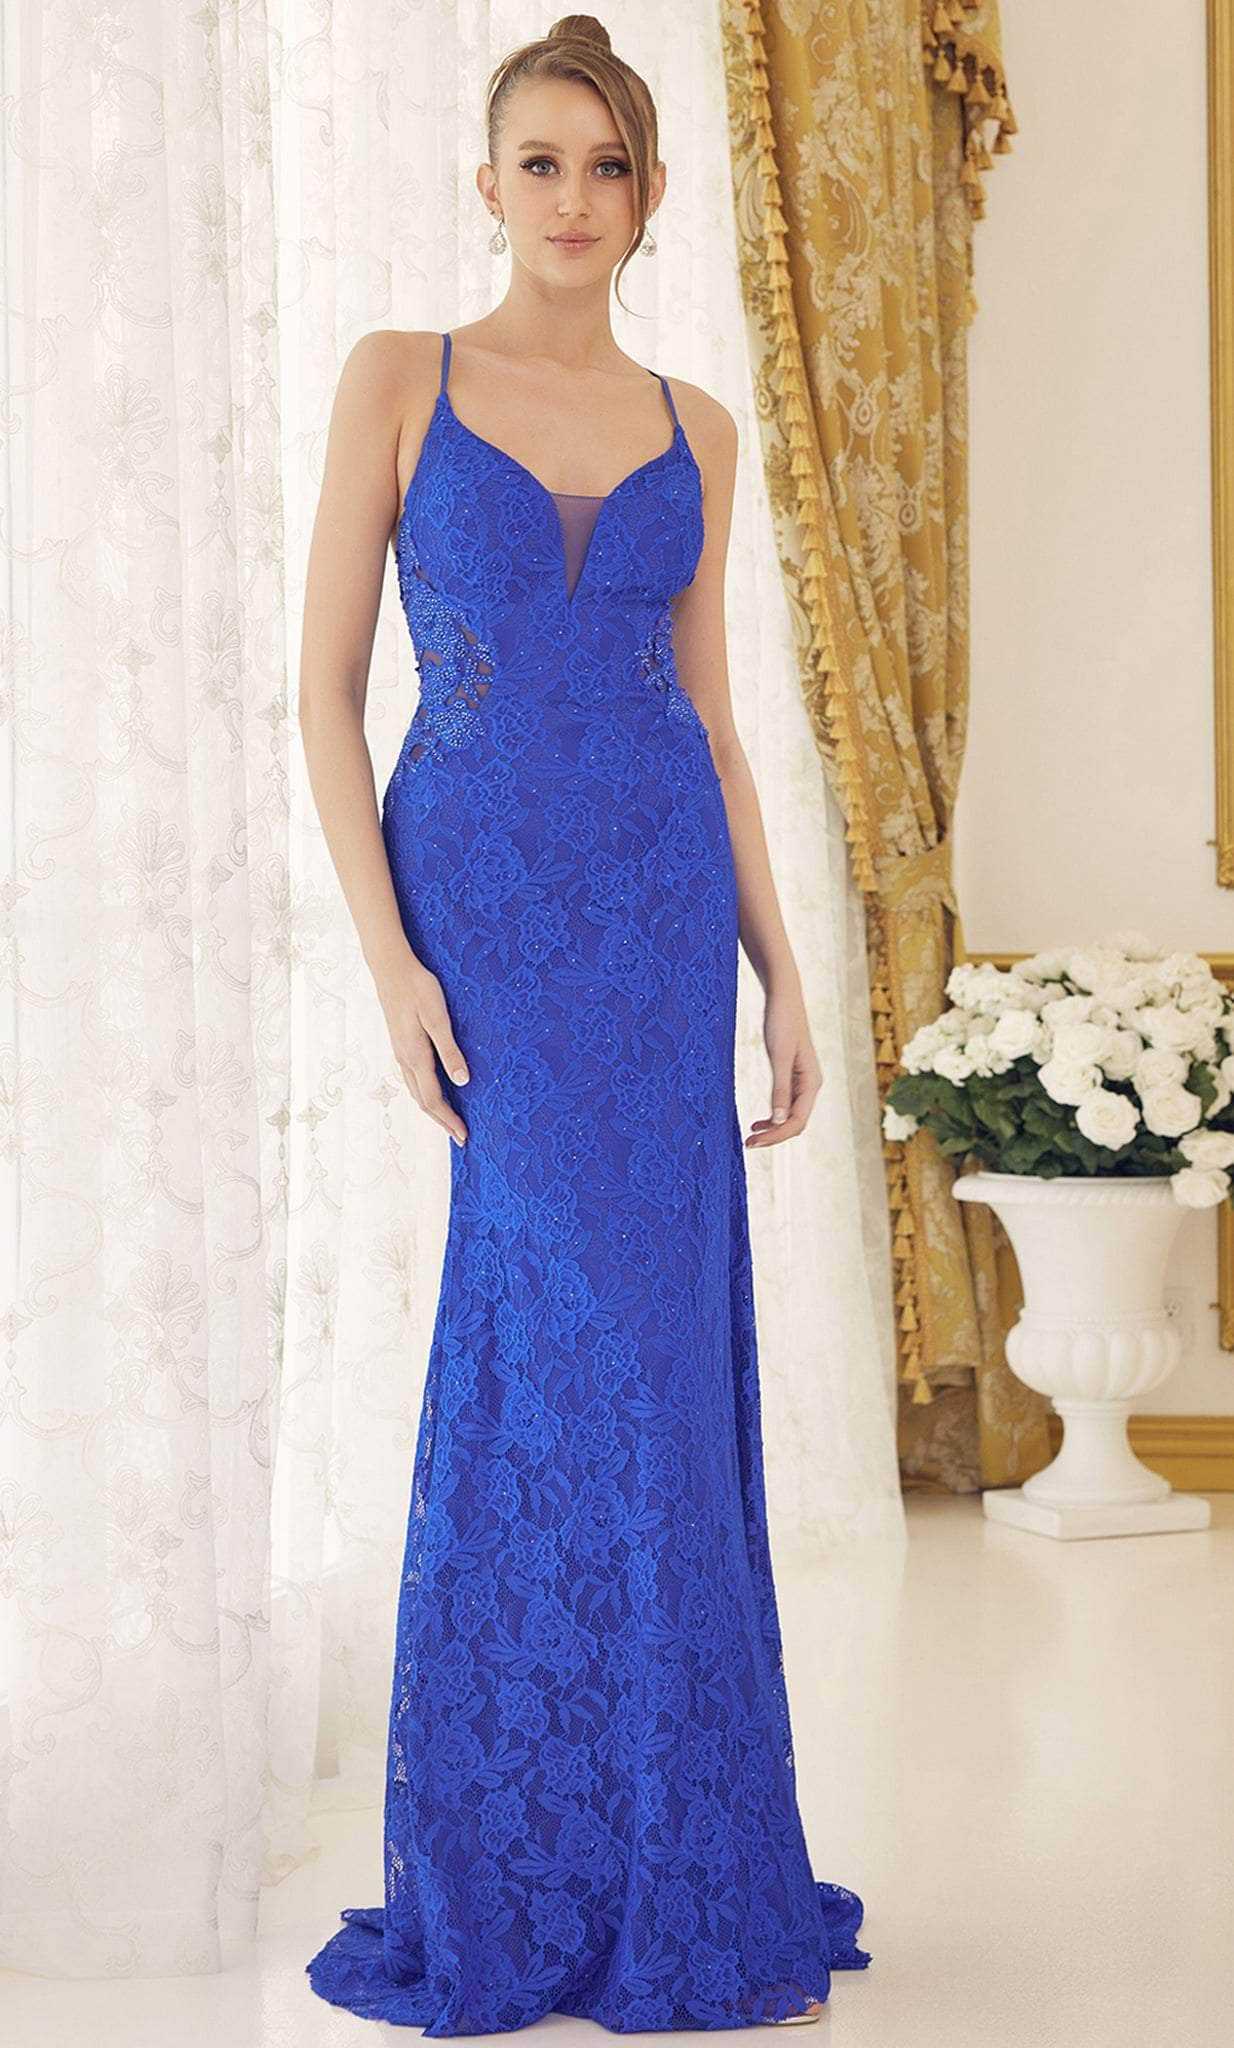 Nox Anabel, Nox Anabel E1076 - Beaded Lace Prom Dress